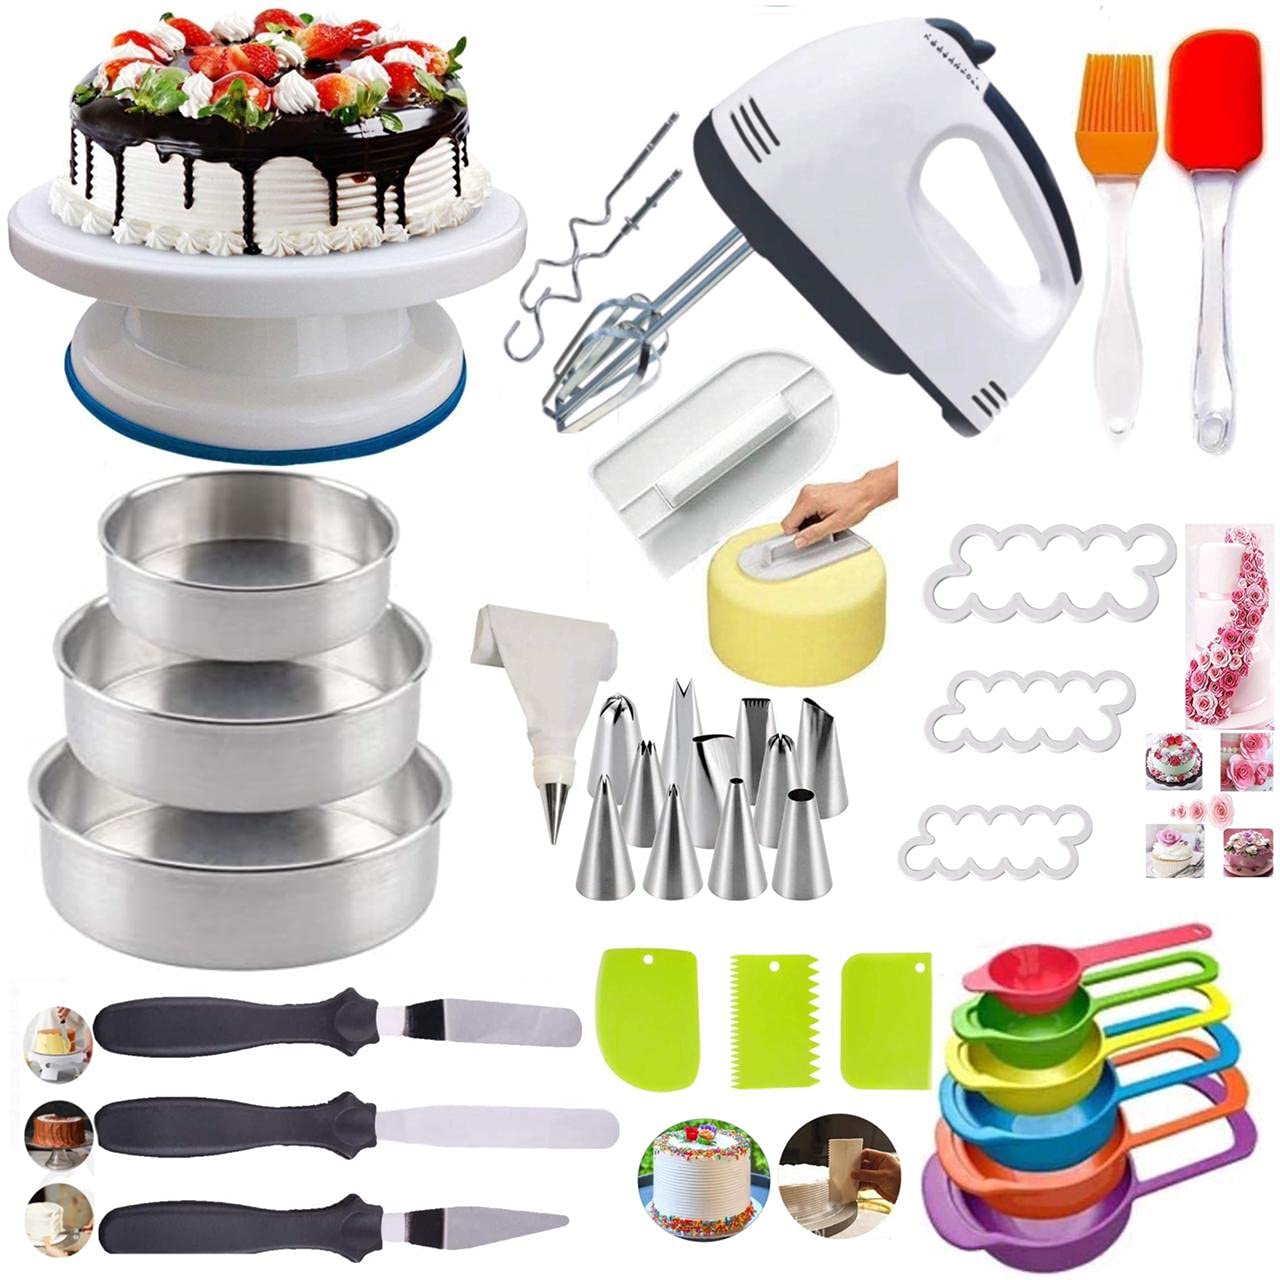 Mua Kootek 71PCs Cake Decorating Supplies Kit, Cake Decorating Set with Cake  Turntable, 12 Numbered Icing Piping Tips, 2 Spatulas, 3 Icing Comb Scraper,  50+2 Piping Bags, and 1 Coupler for Baking